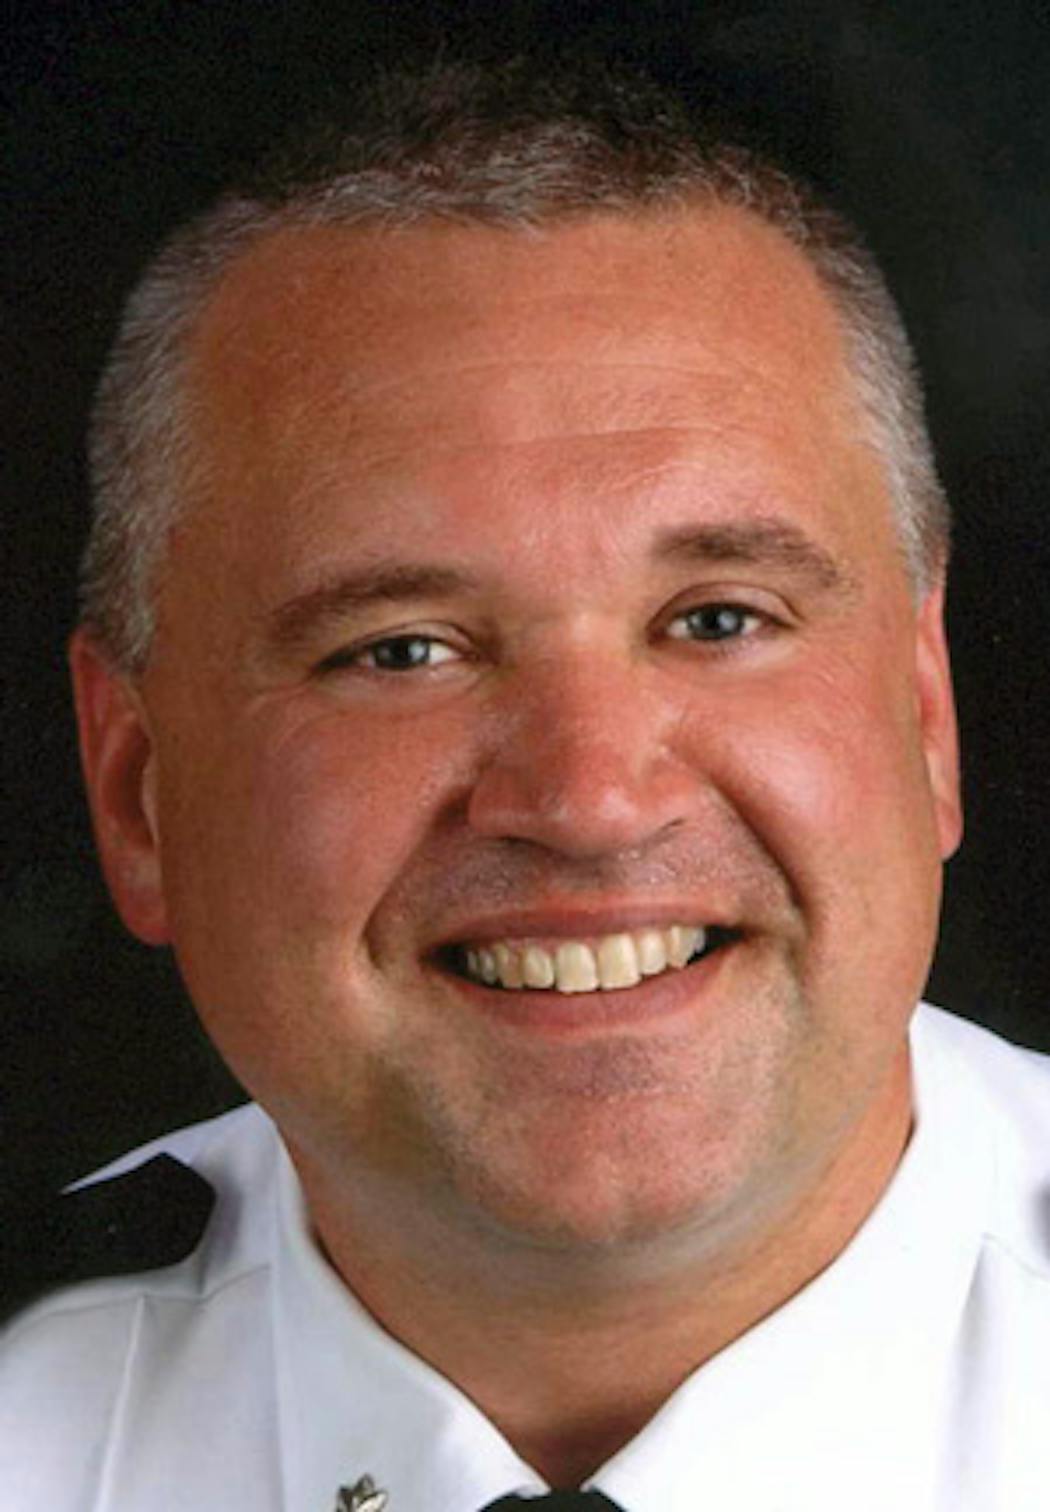 New Ulm Police Chief Myron Wieland said being charged with choking and throwing his wife was a personal 